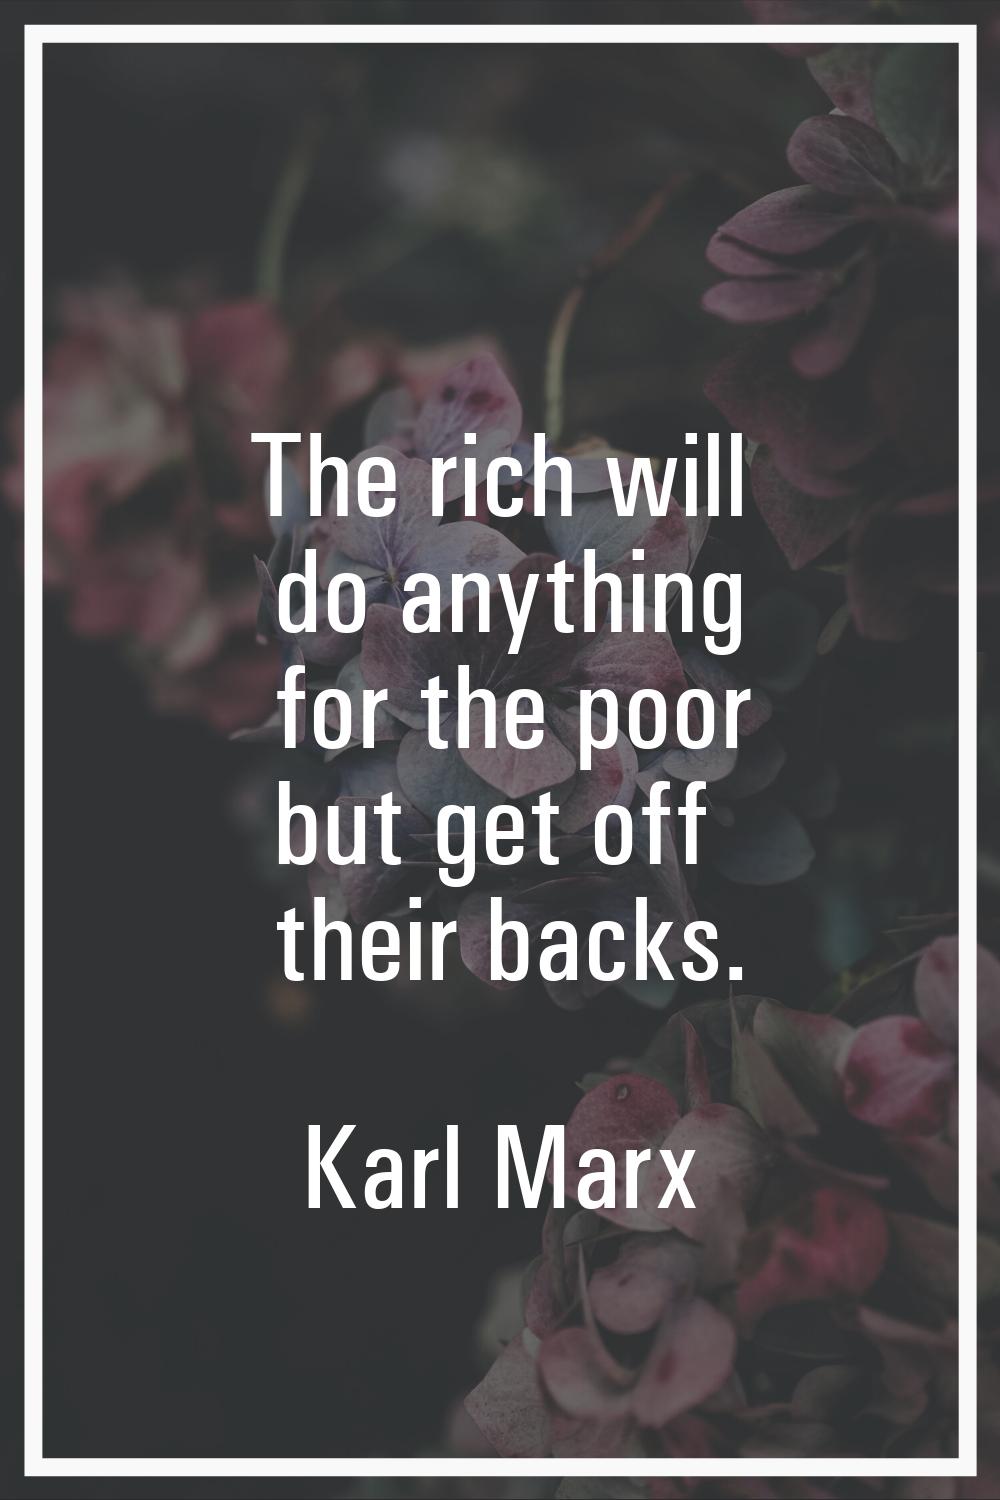 The rich will do anything for the poor but get off their backs.